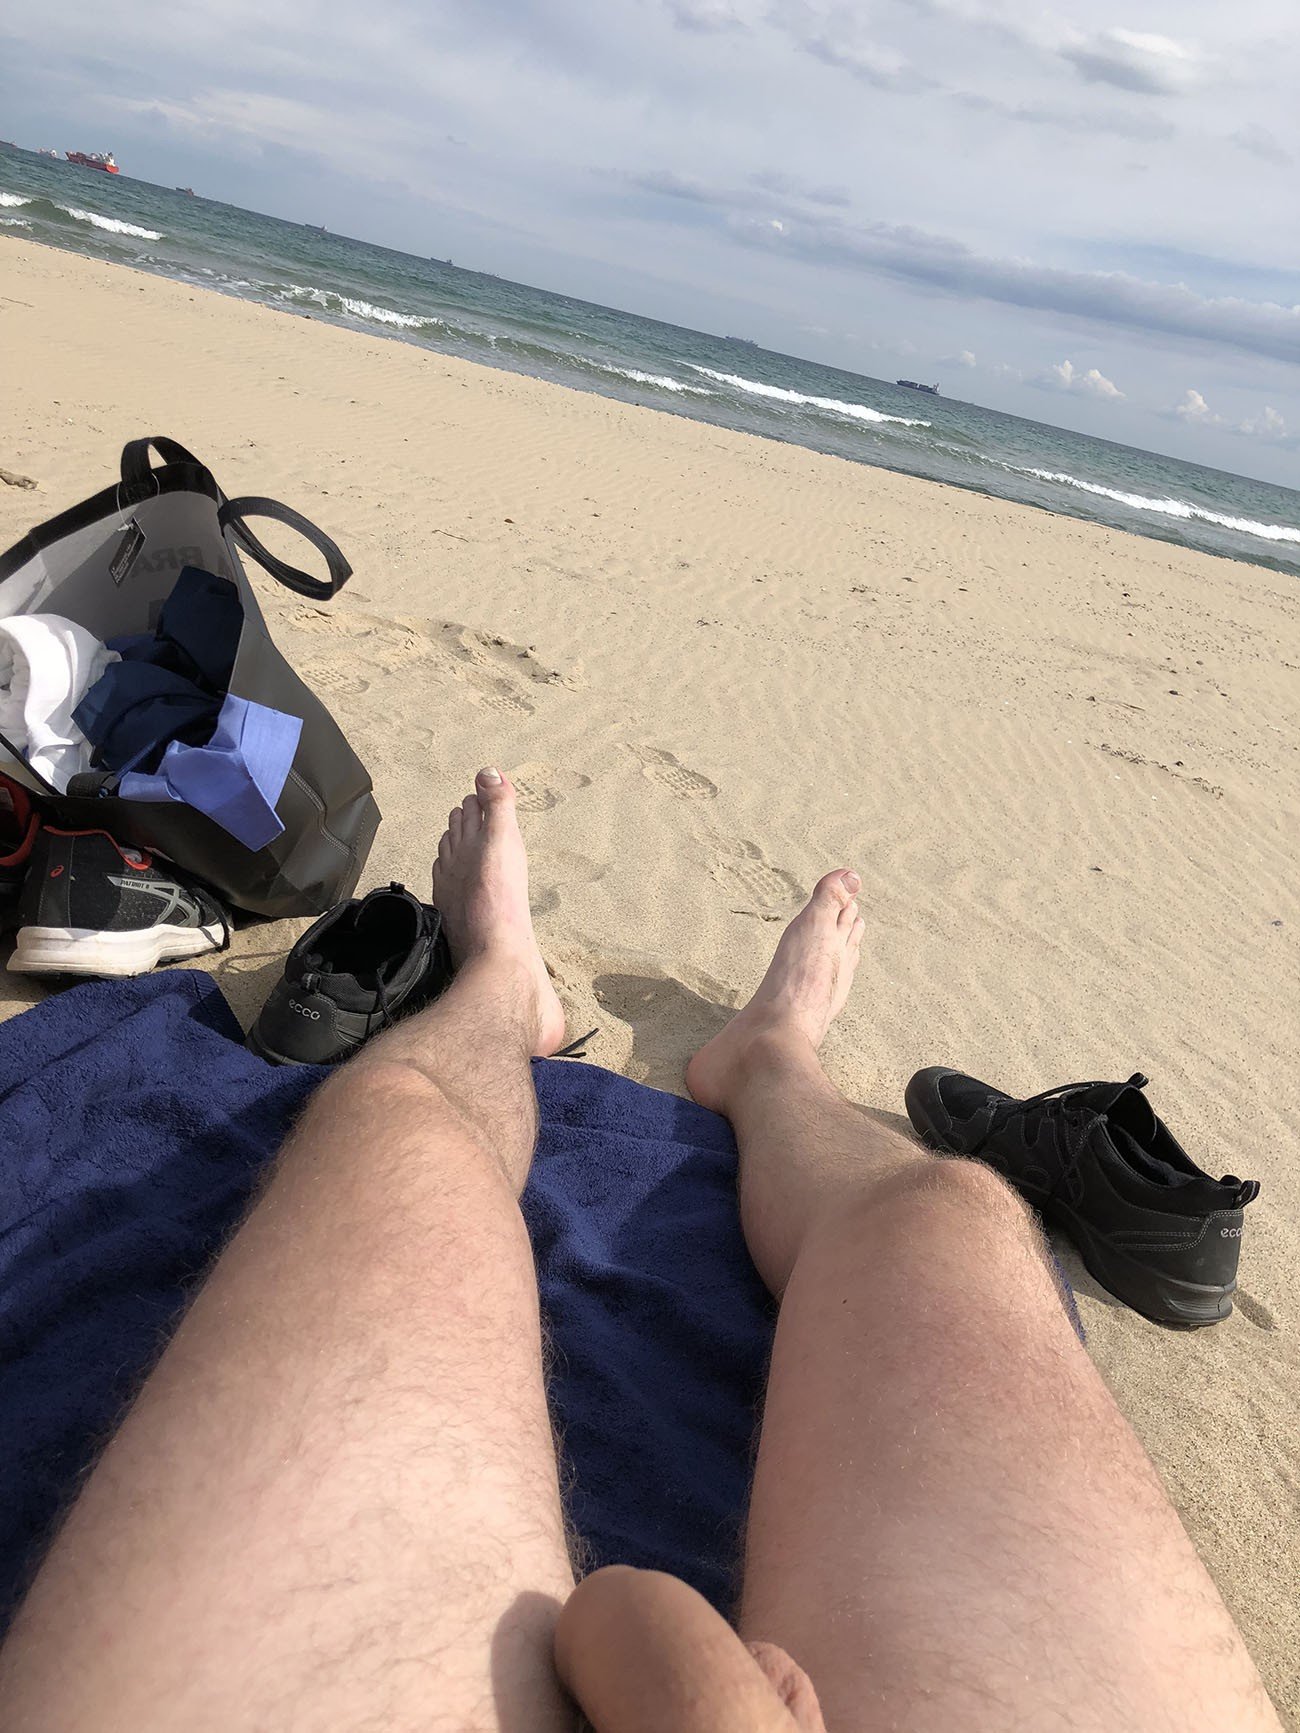 Photo by Bakk with the username @Bakk, who is a verified user,  December 10, 2018 at 4:47 PM. The post is about the topic Nude Beach and the text says 'Summer memories..'